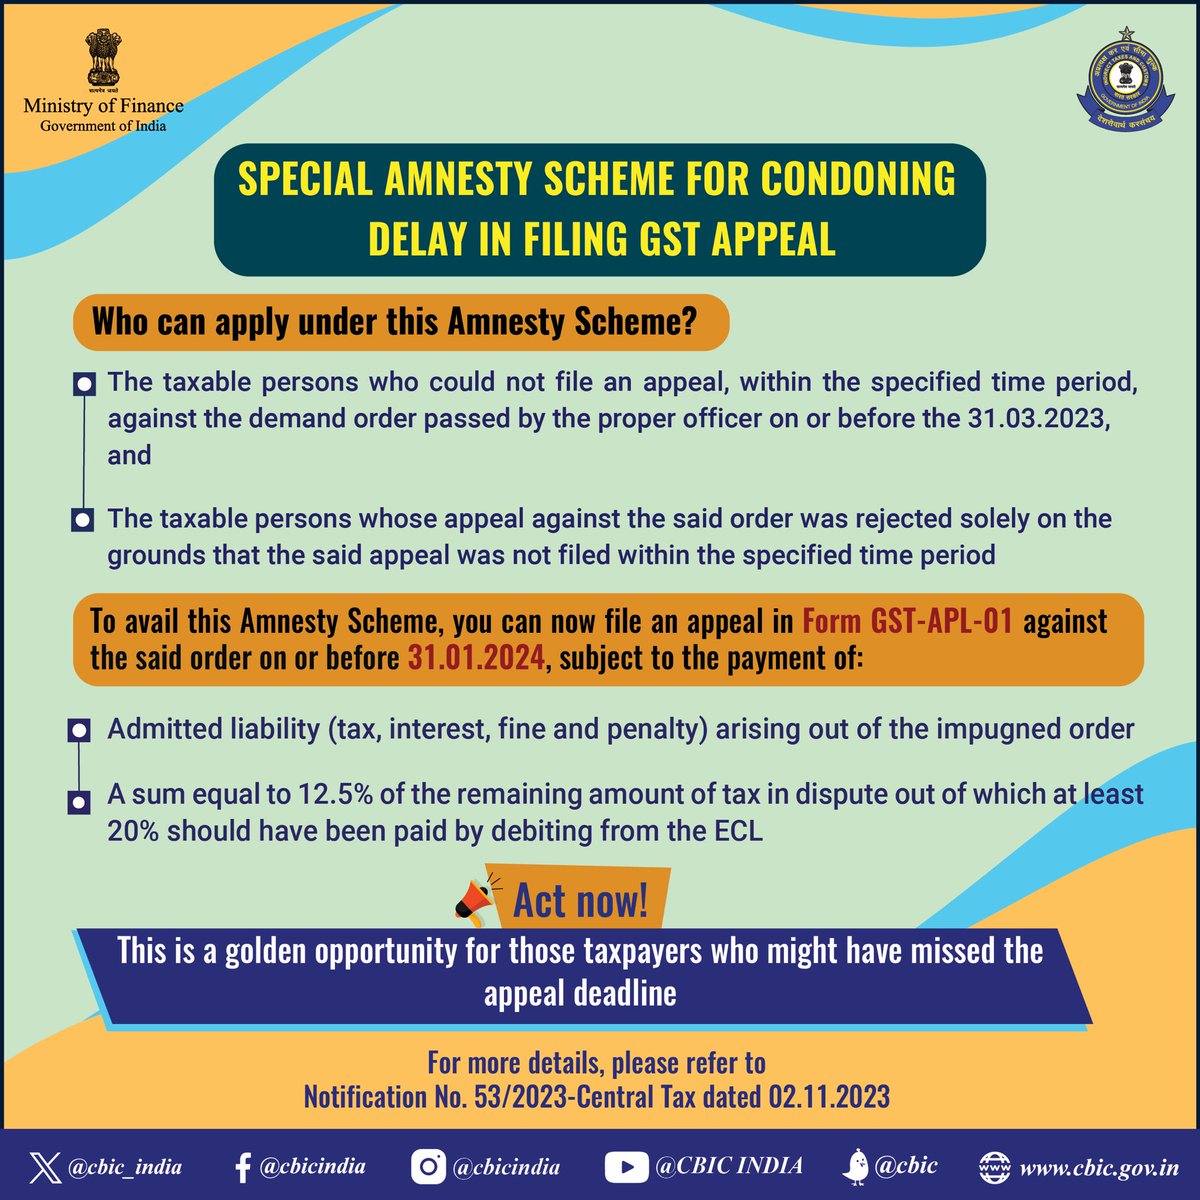 Special Amnesty Scheme announced for condoning delay in filing GST Appeal. The amnesty scheme is available till 31st January 2024. This is a golden opportunity for those taxpayers who might have missed the appeal deadline. #GSTforGrowth #EaseofDoingBusiness #ViksitBharat…